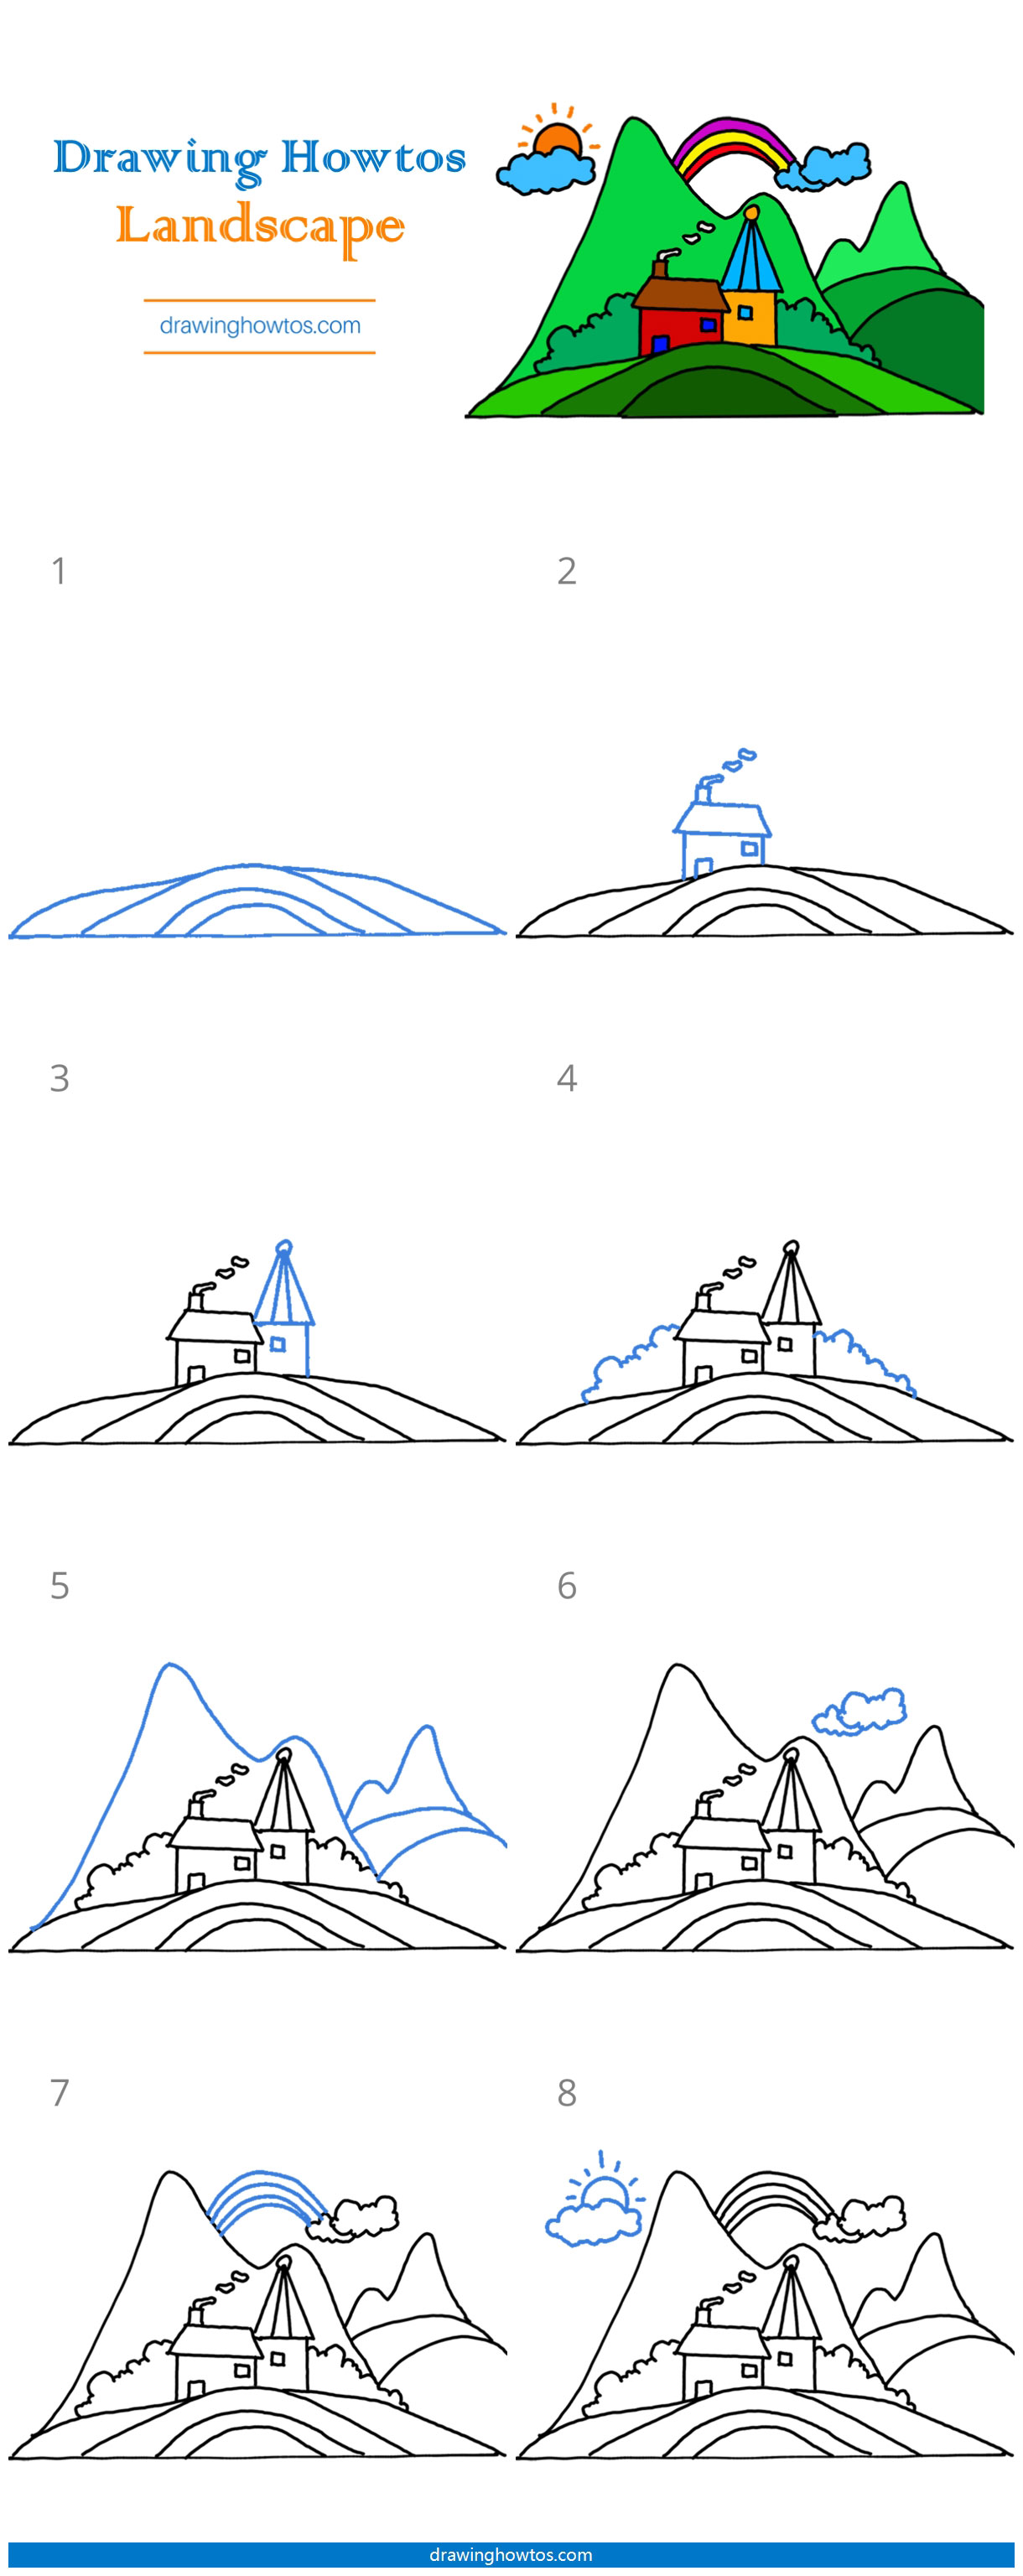 How to Draw a Landscape Step by Step